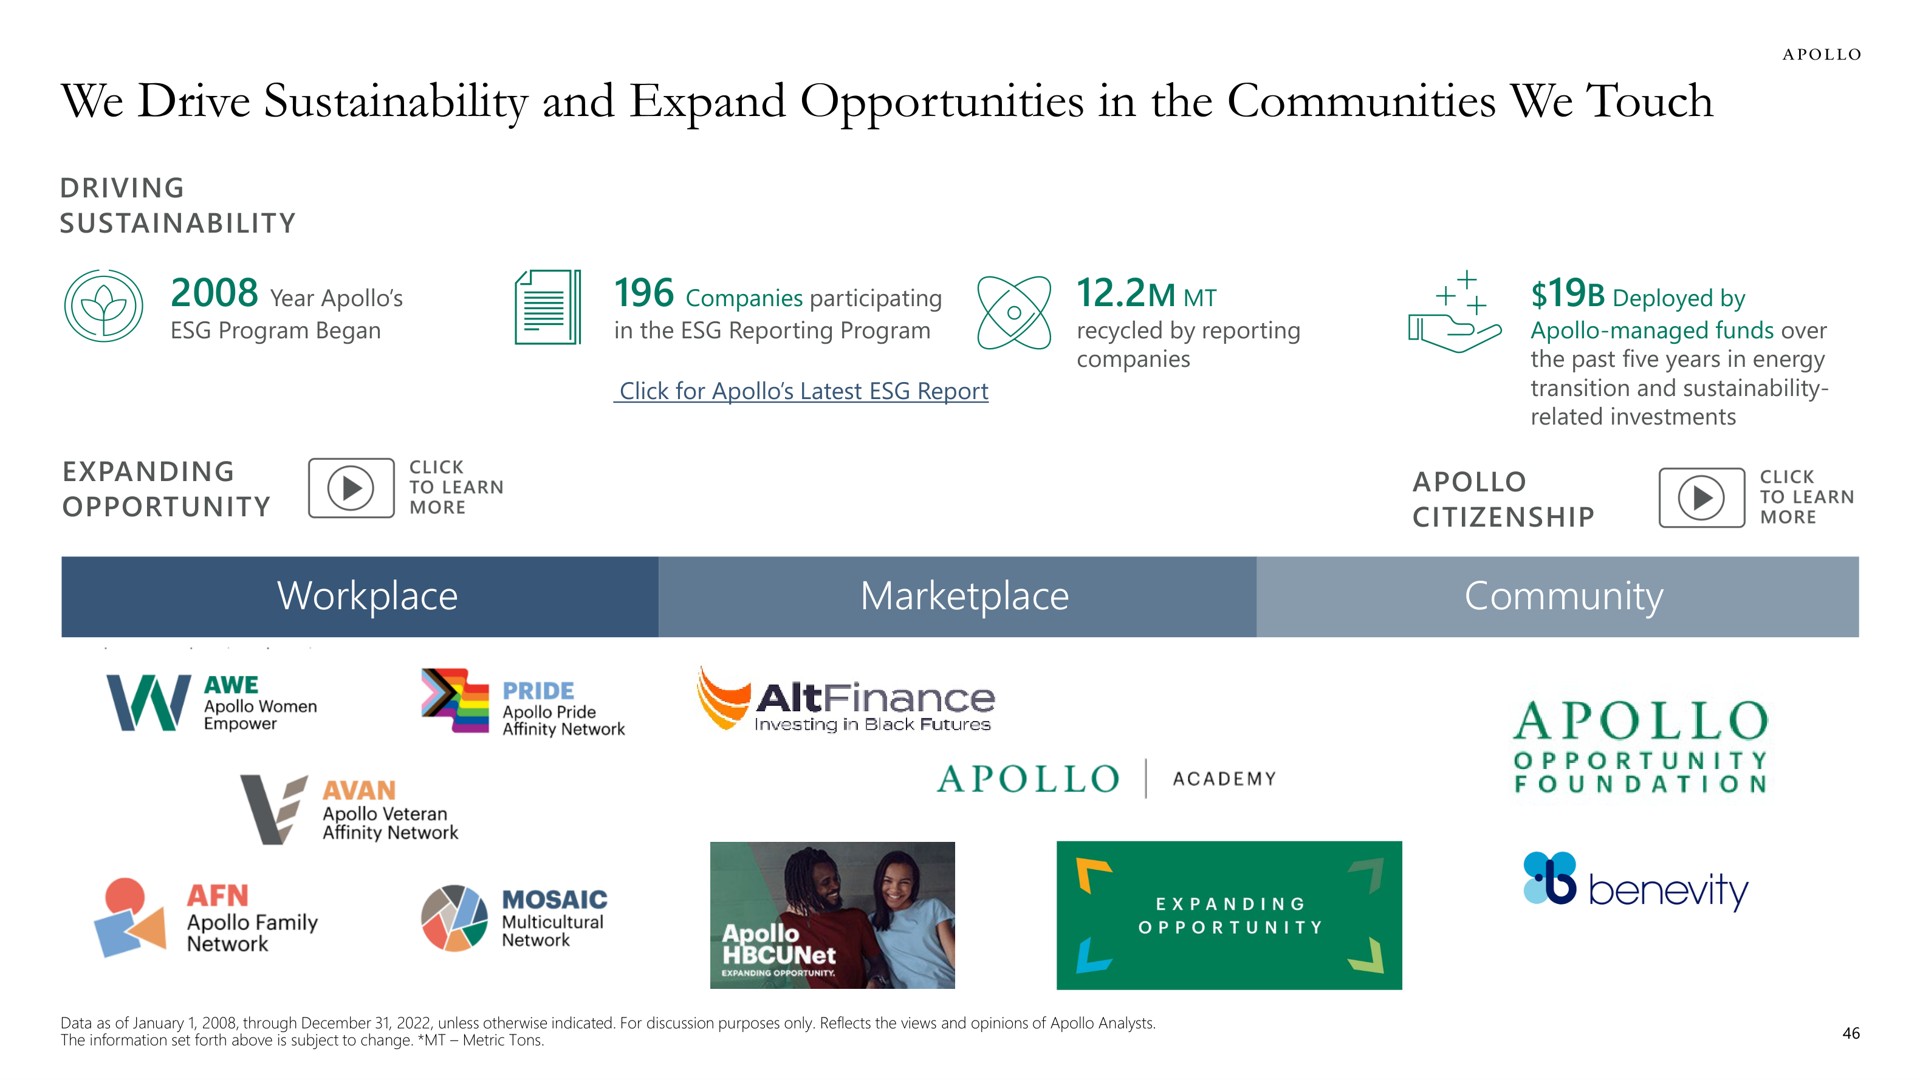 we drive and expand opportunities in the communities we touch opportunity more citizenship more workplace community pride | Apollo Global Management